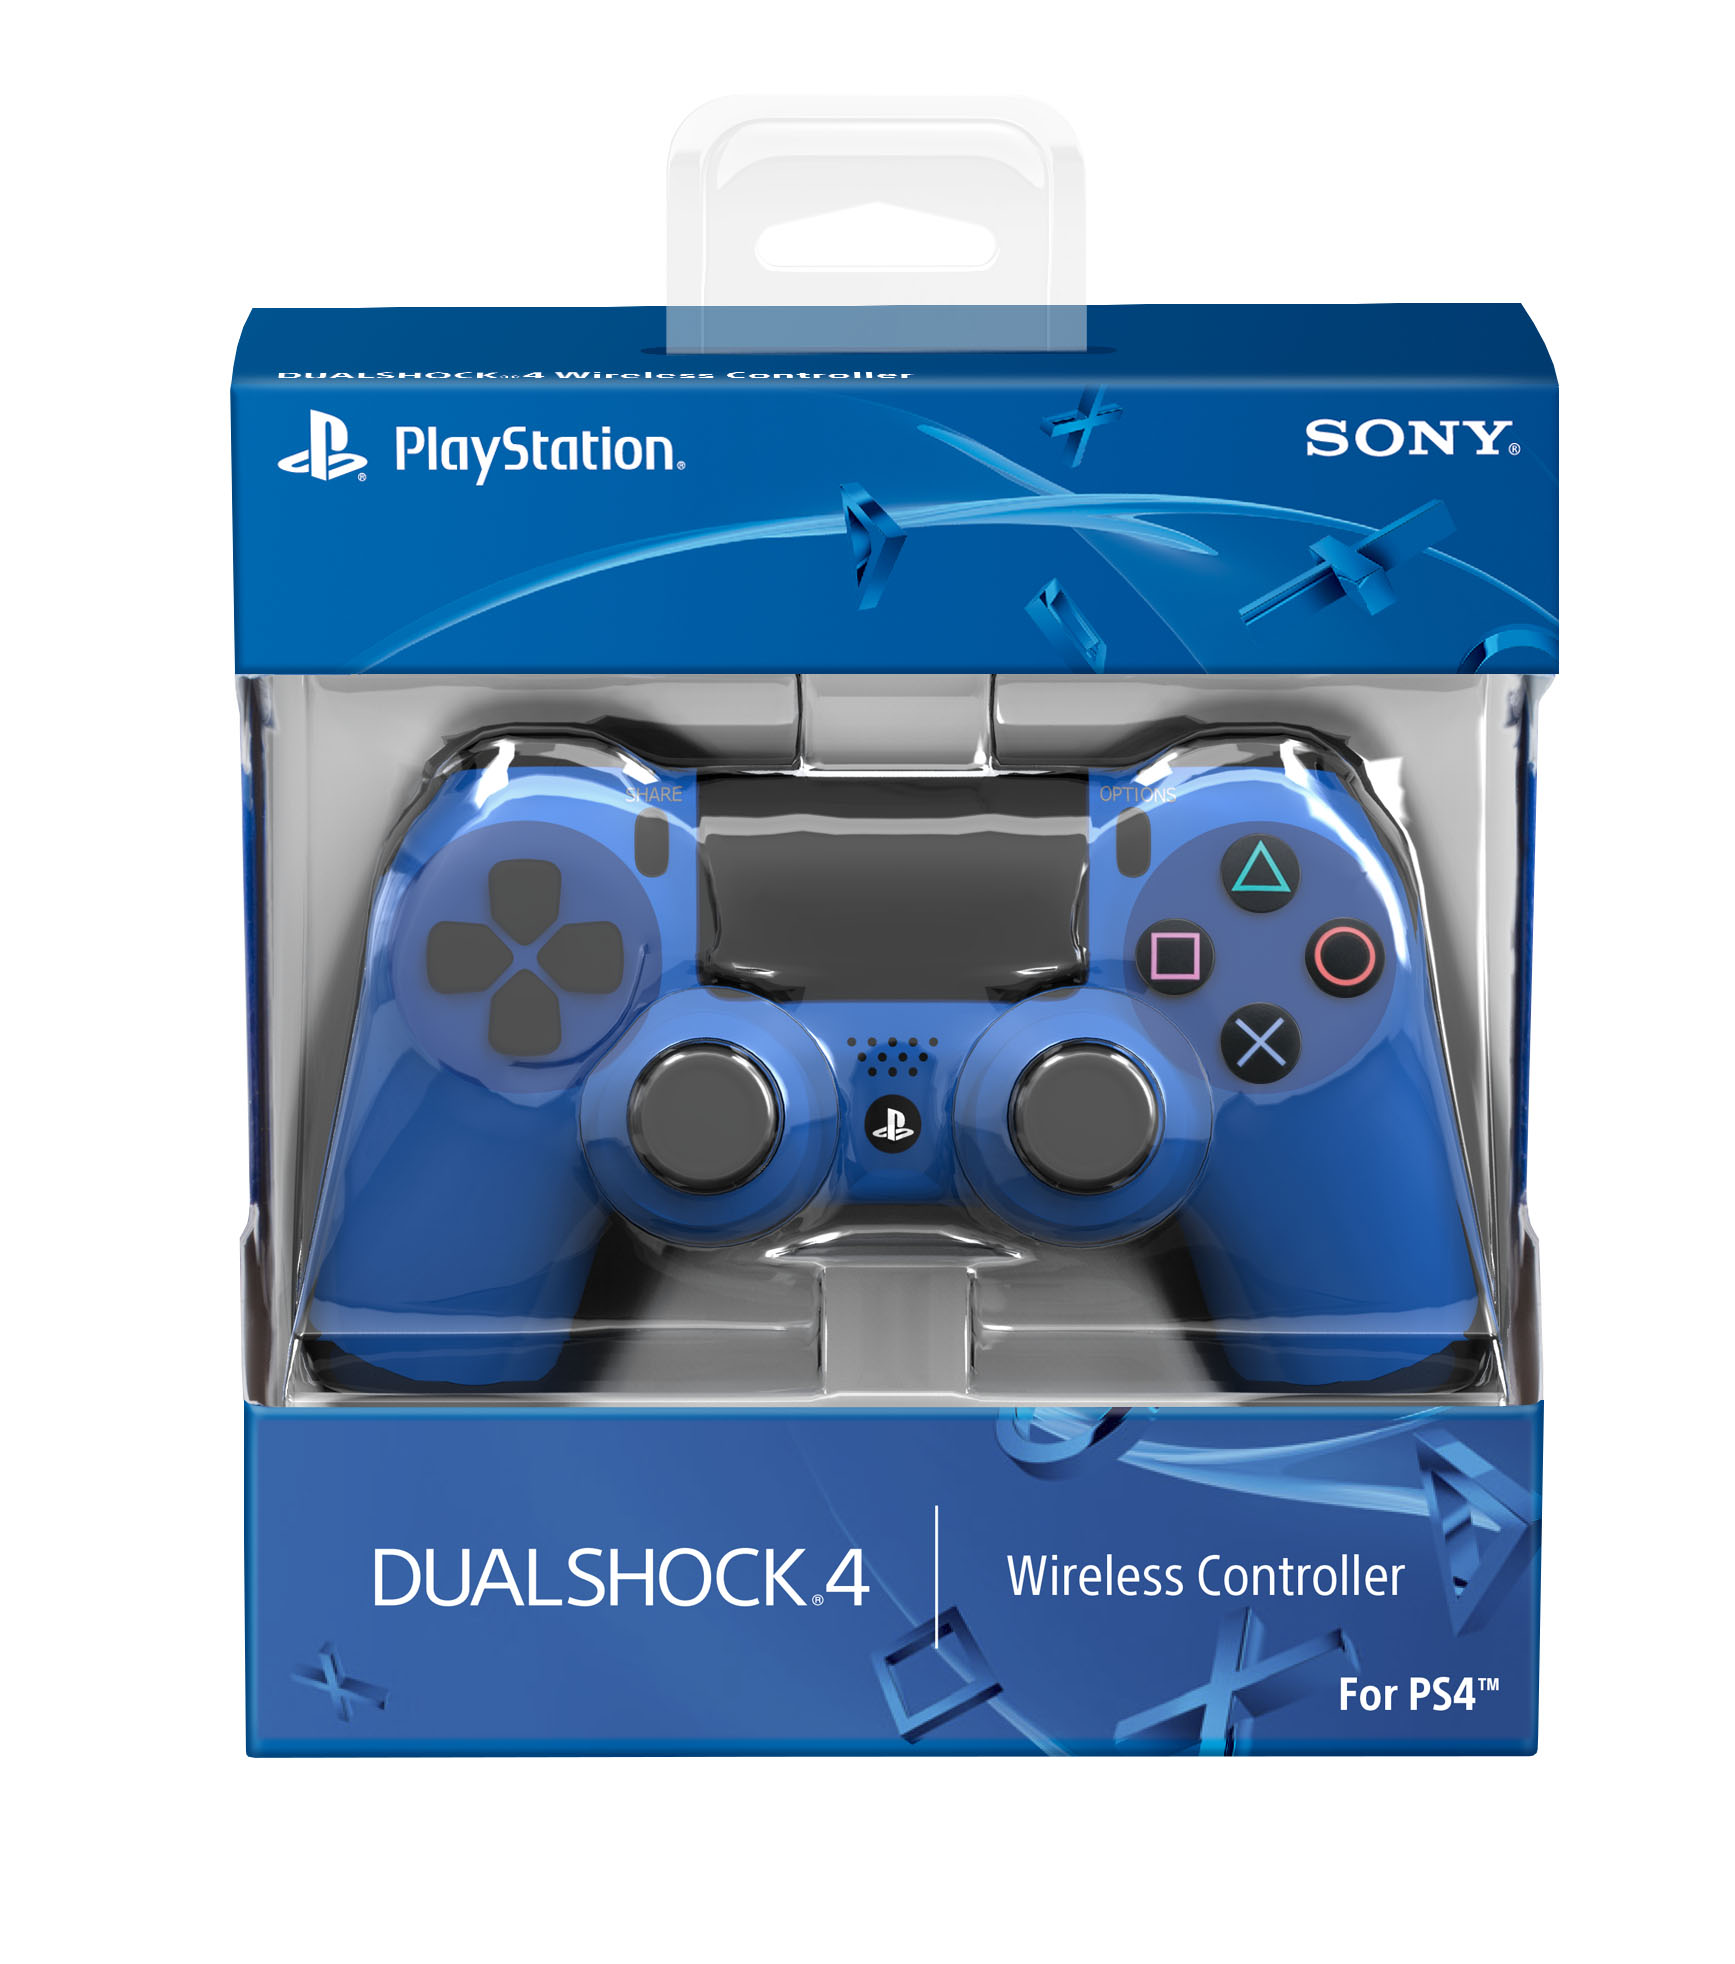 Sony PlayStation 4 (PS4) DualShock 4 Controller - Blue